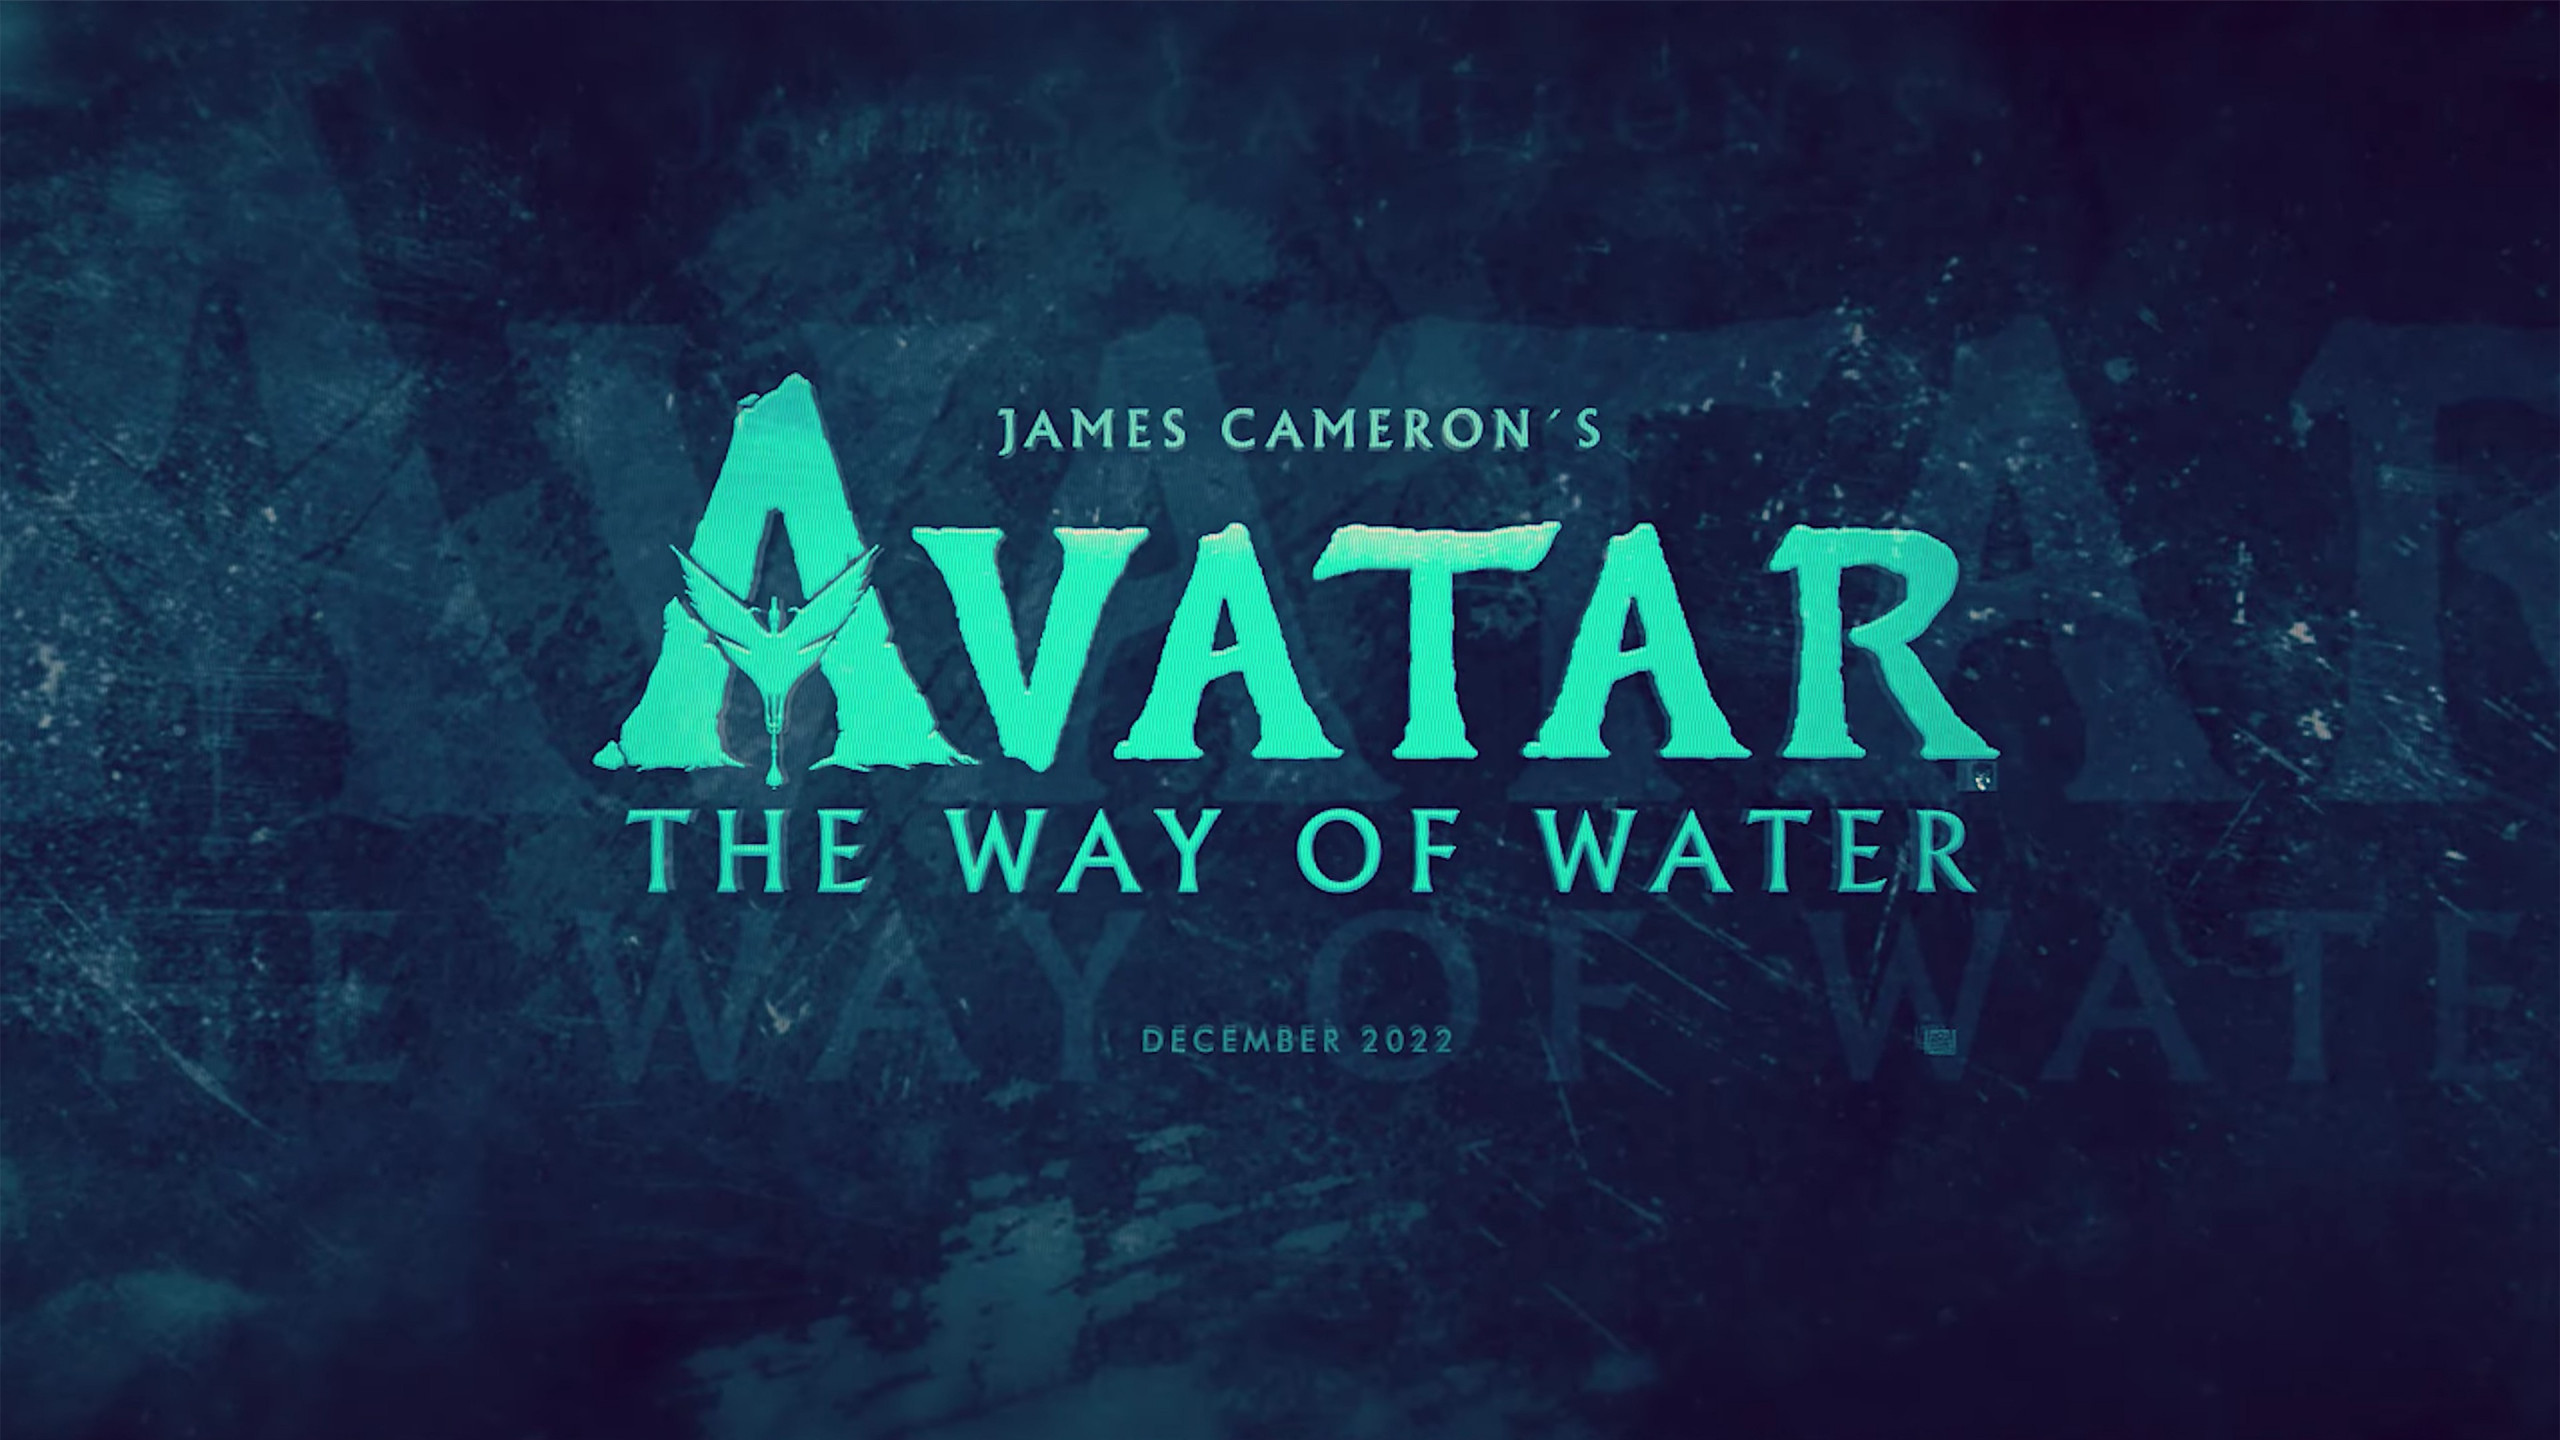 Avatar 2 The Way of Water wallpaper 2560x1440